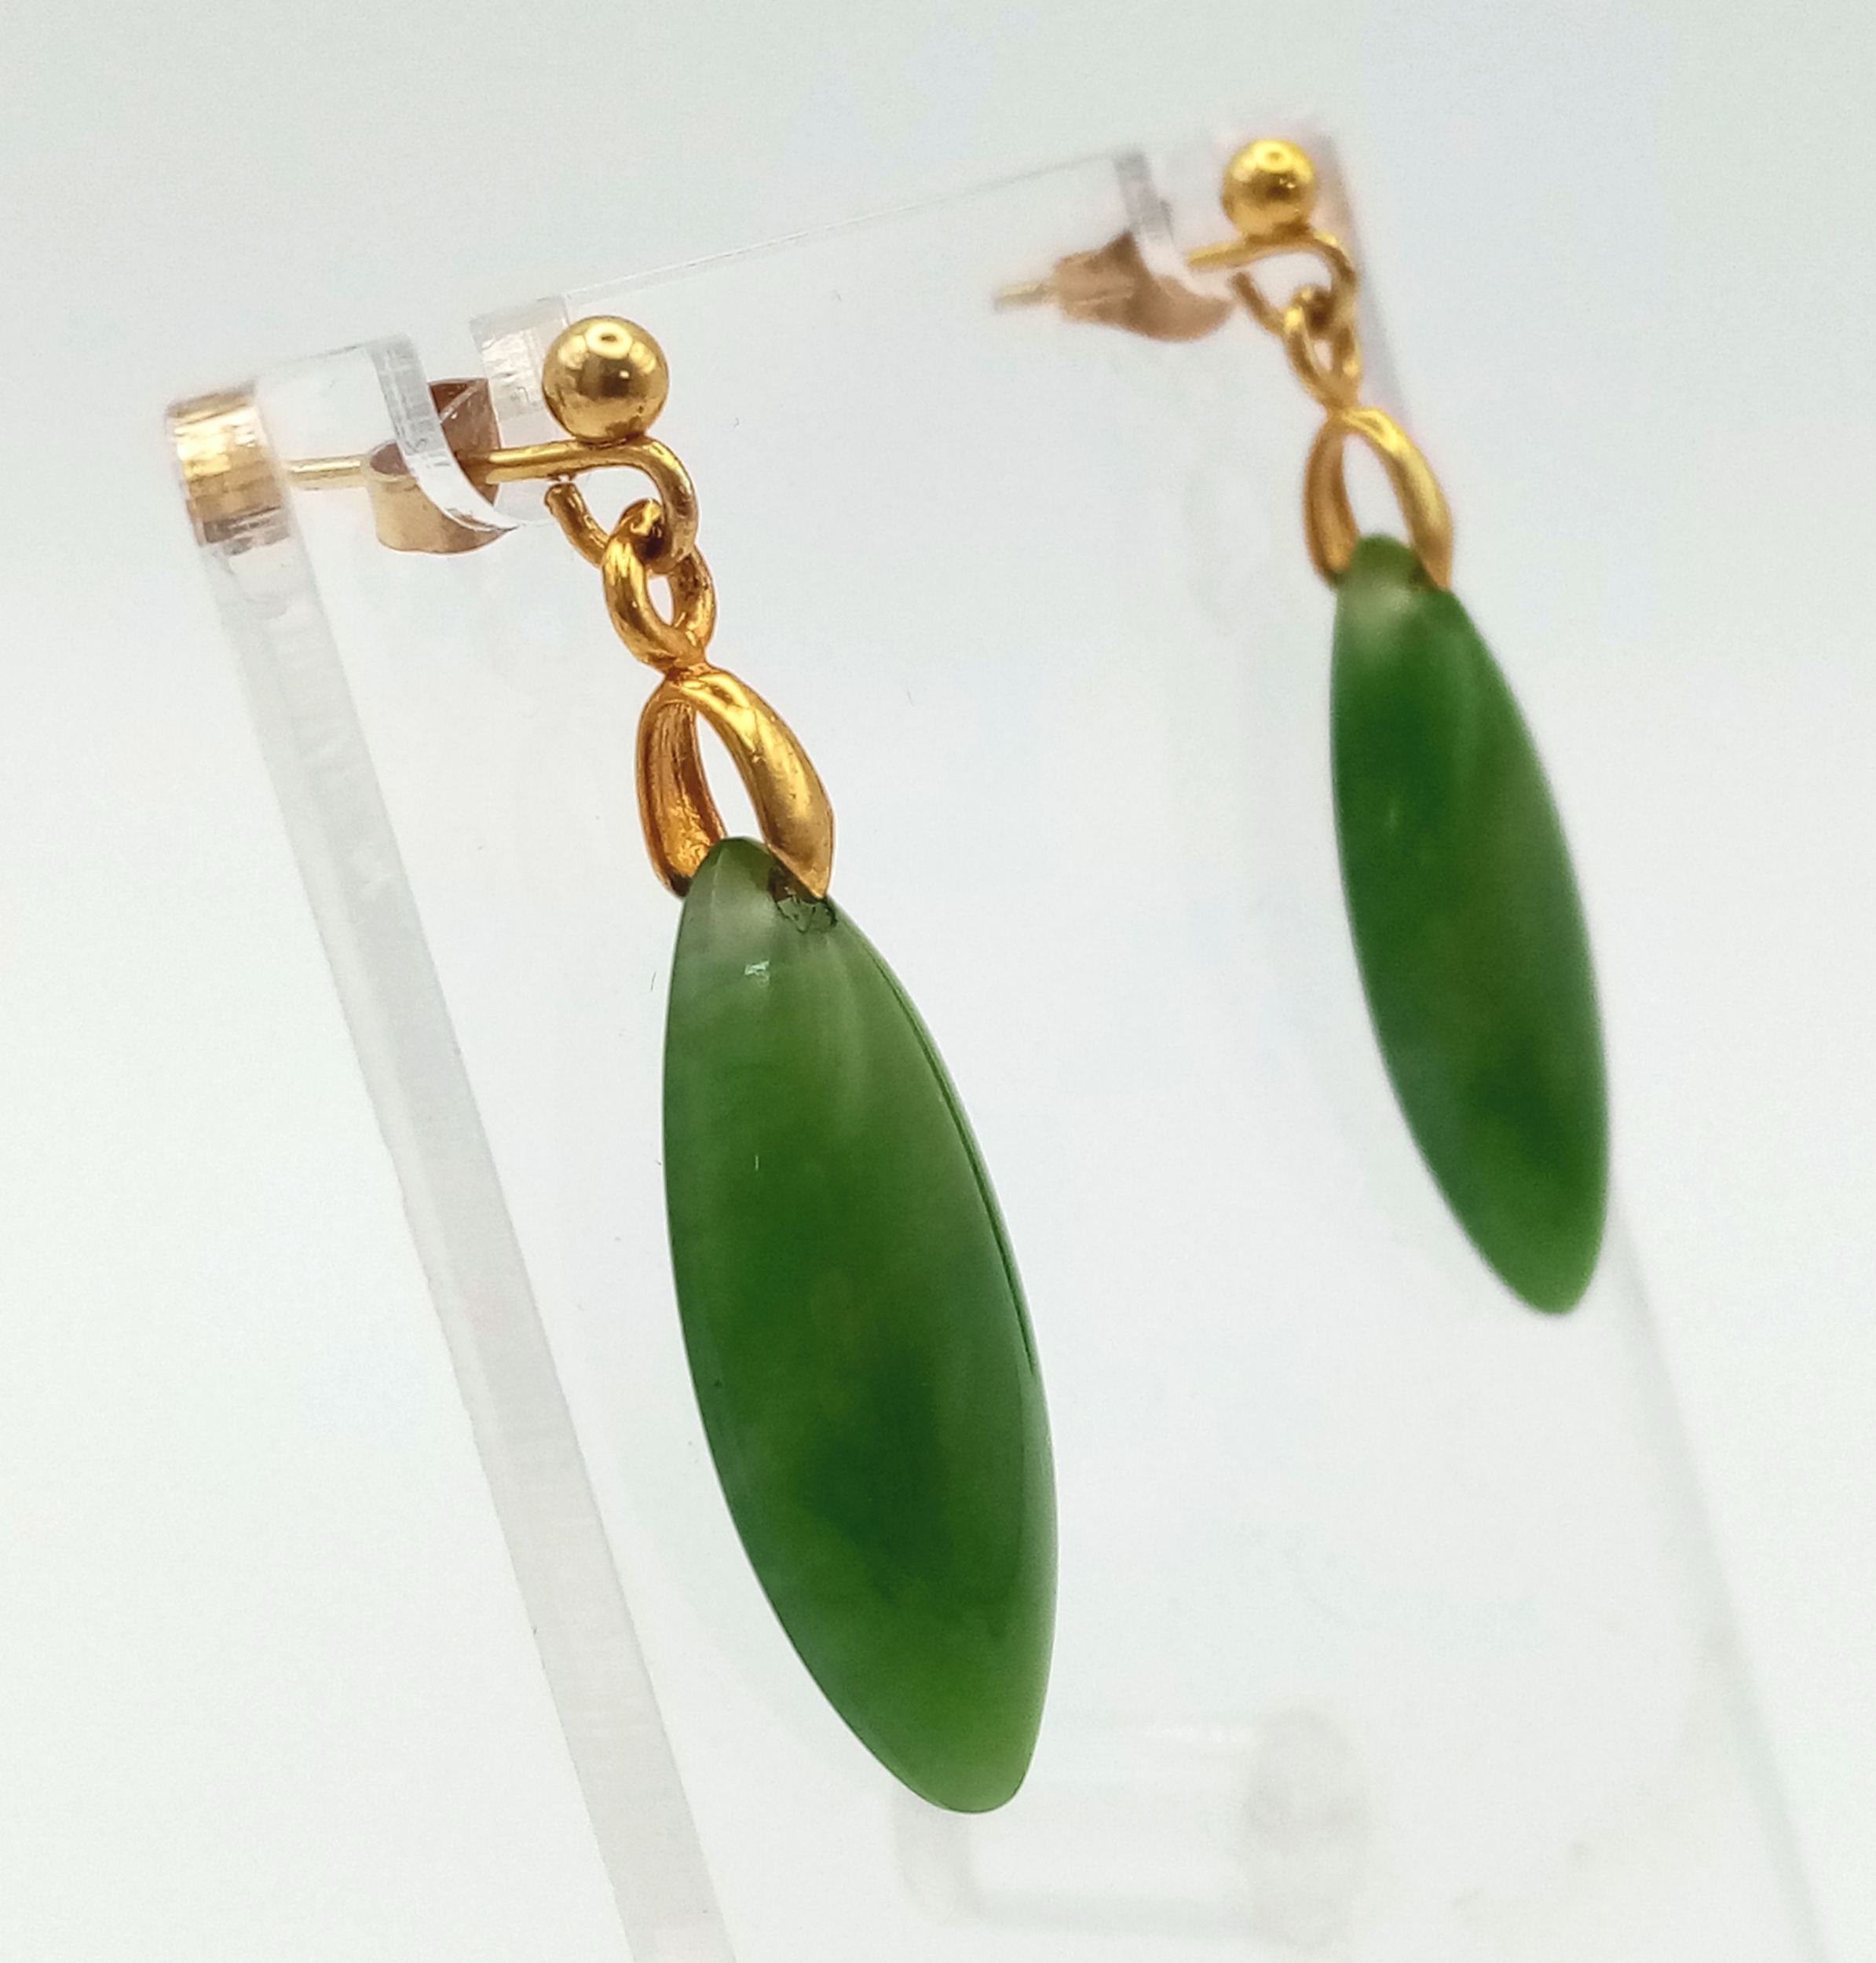 A Pair of 9K Yellow Gold Jade Leaf Shaped Earrings. 4.3g - Image 3 of 4